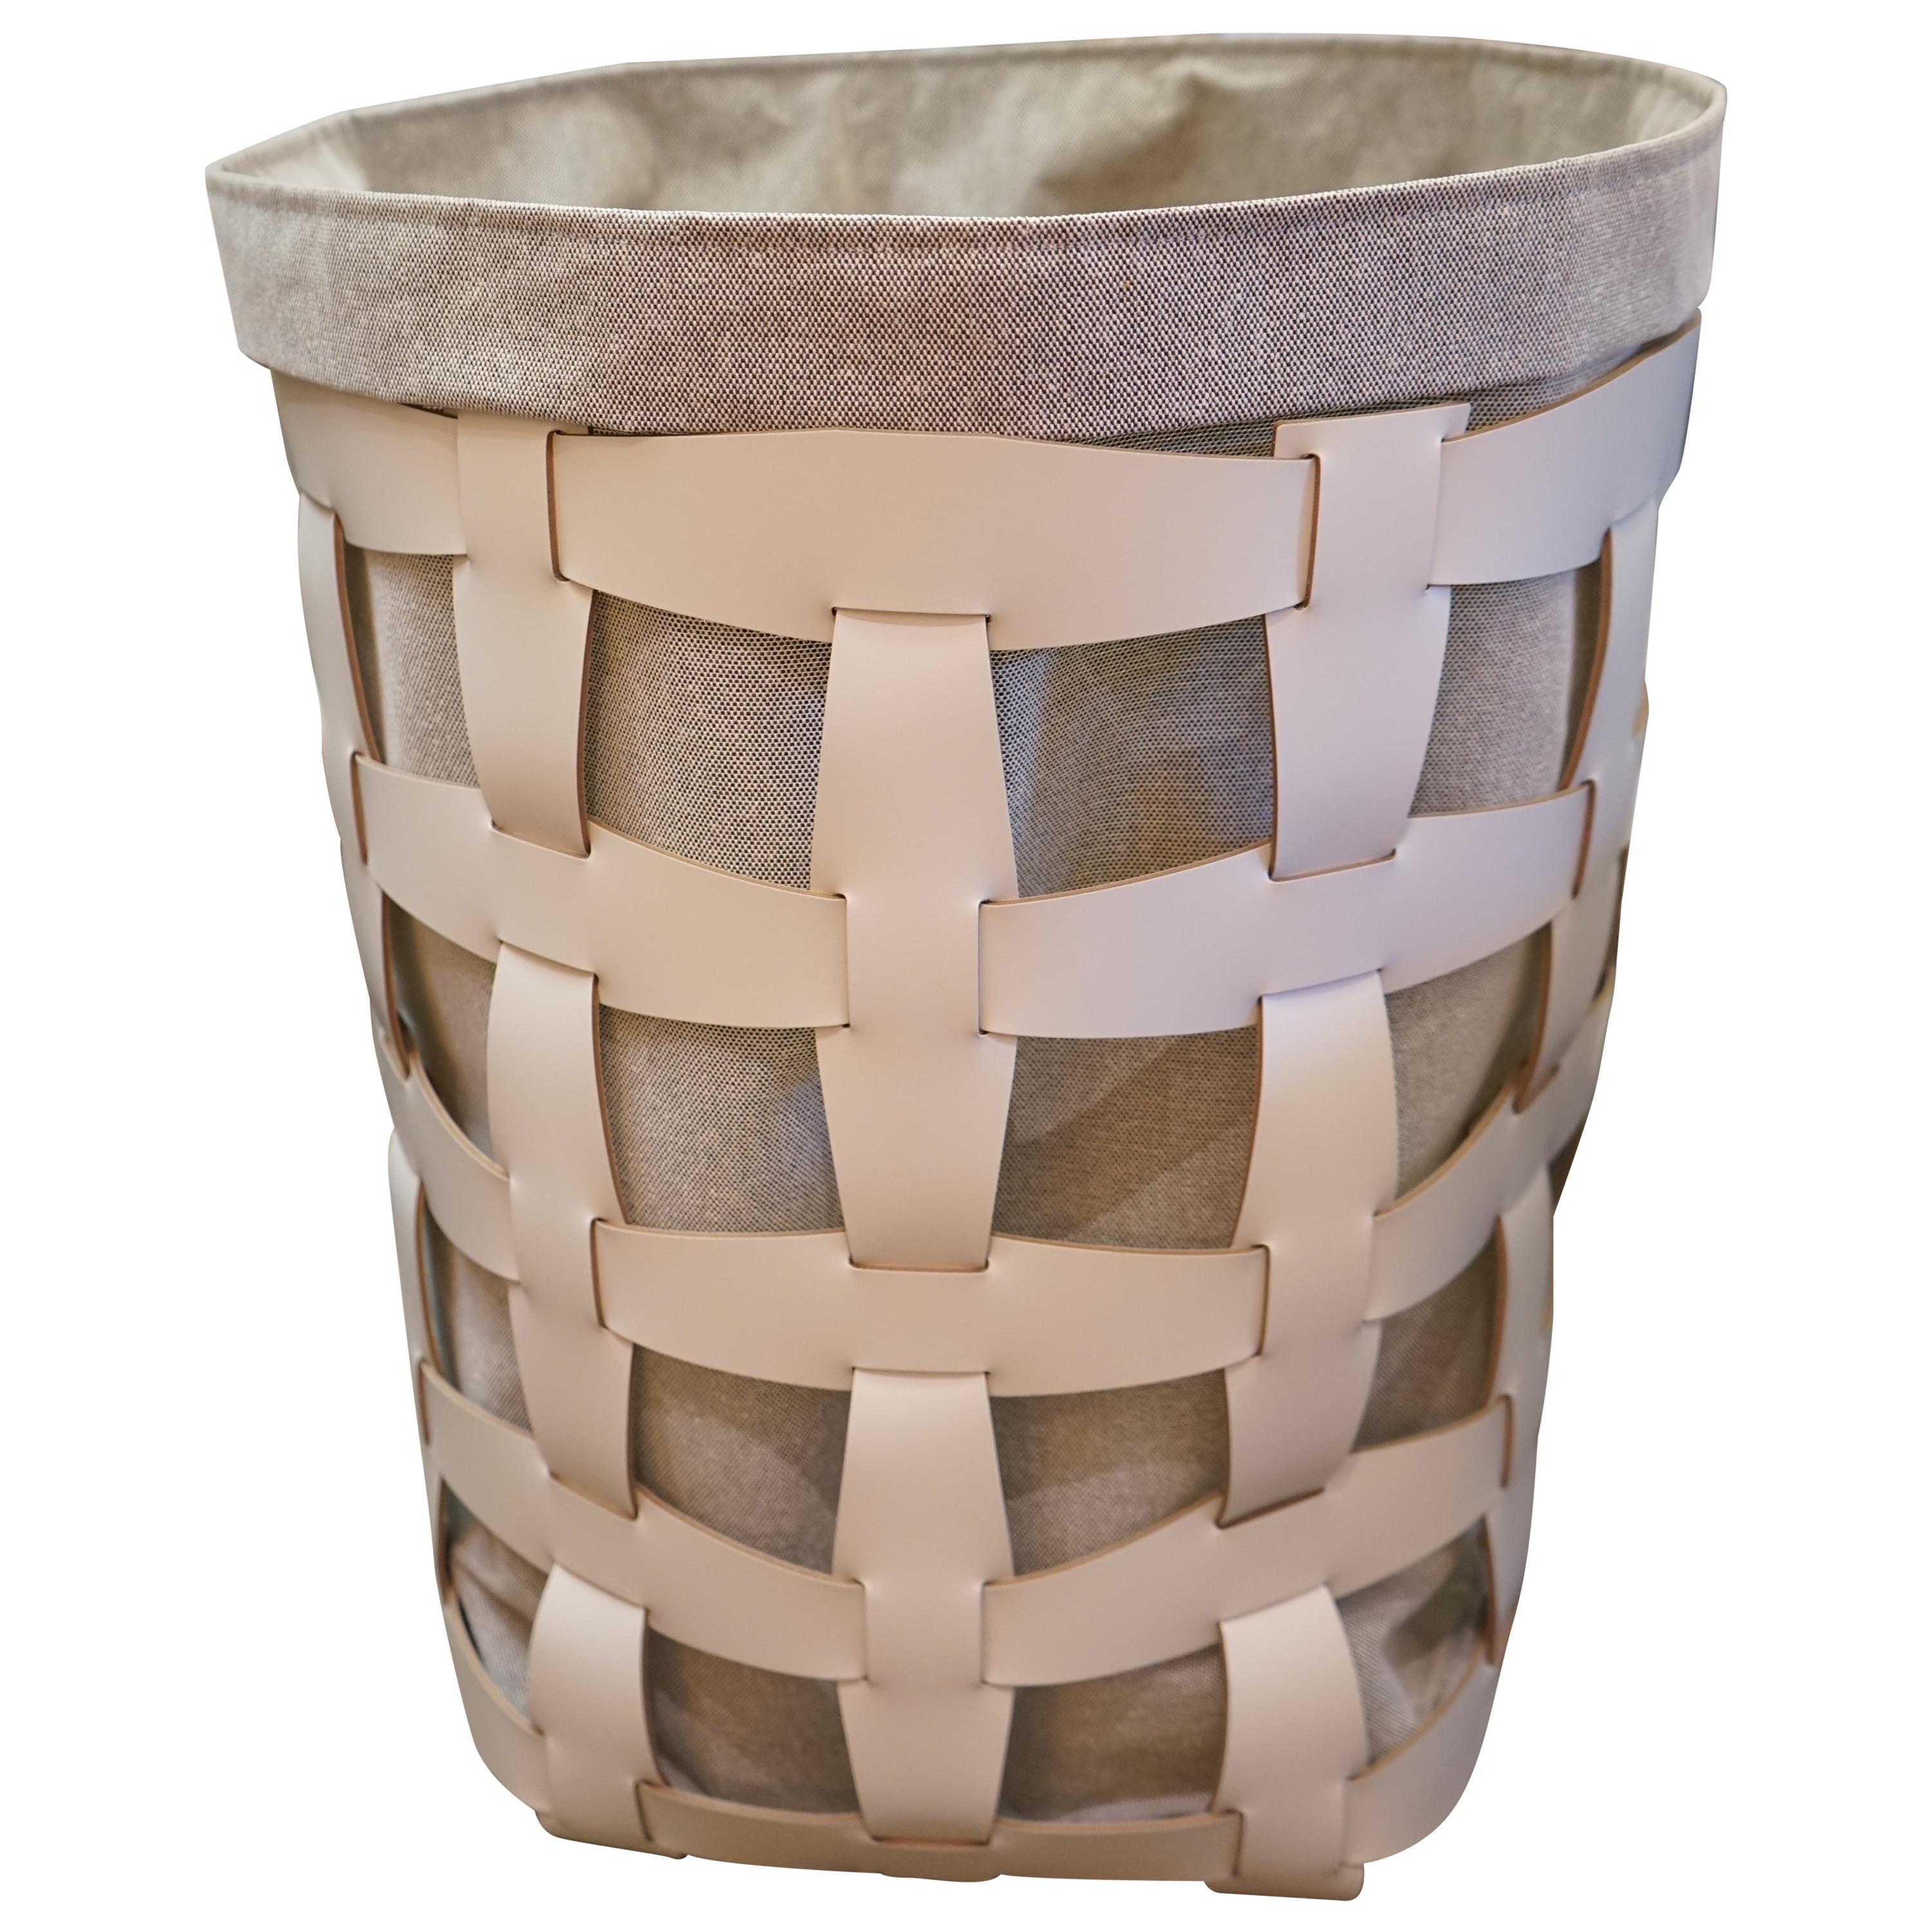 Contemporary Cream Woven Leather Big Hook Laundry Basket